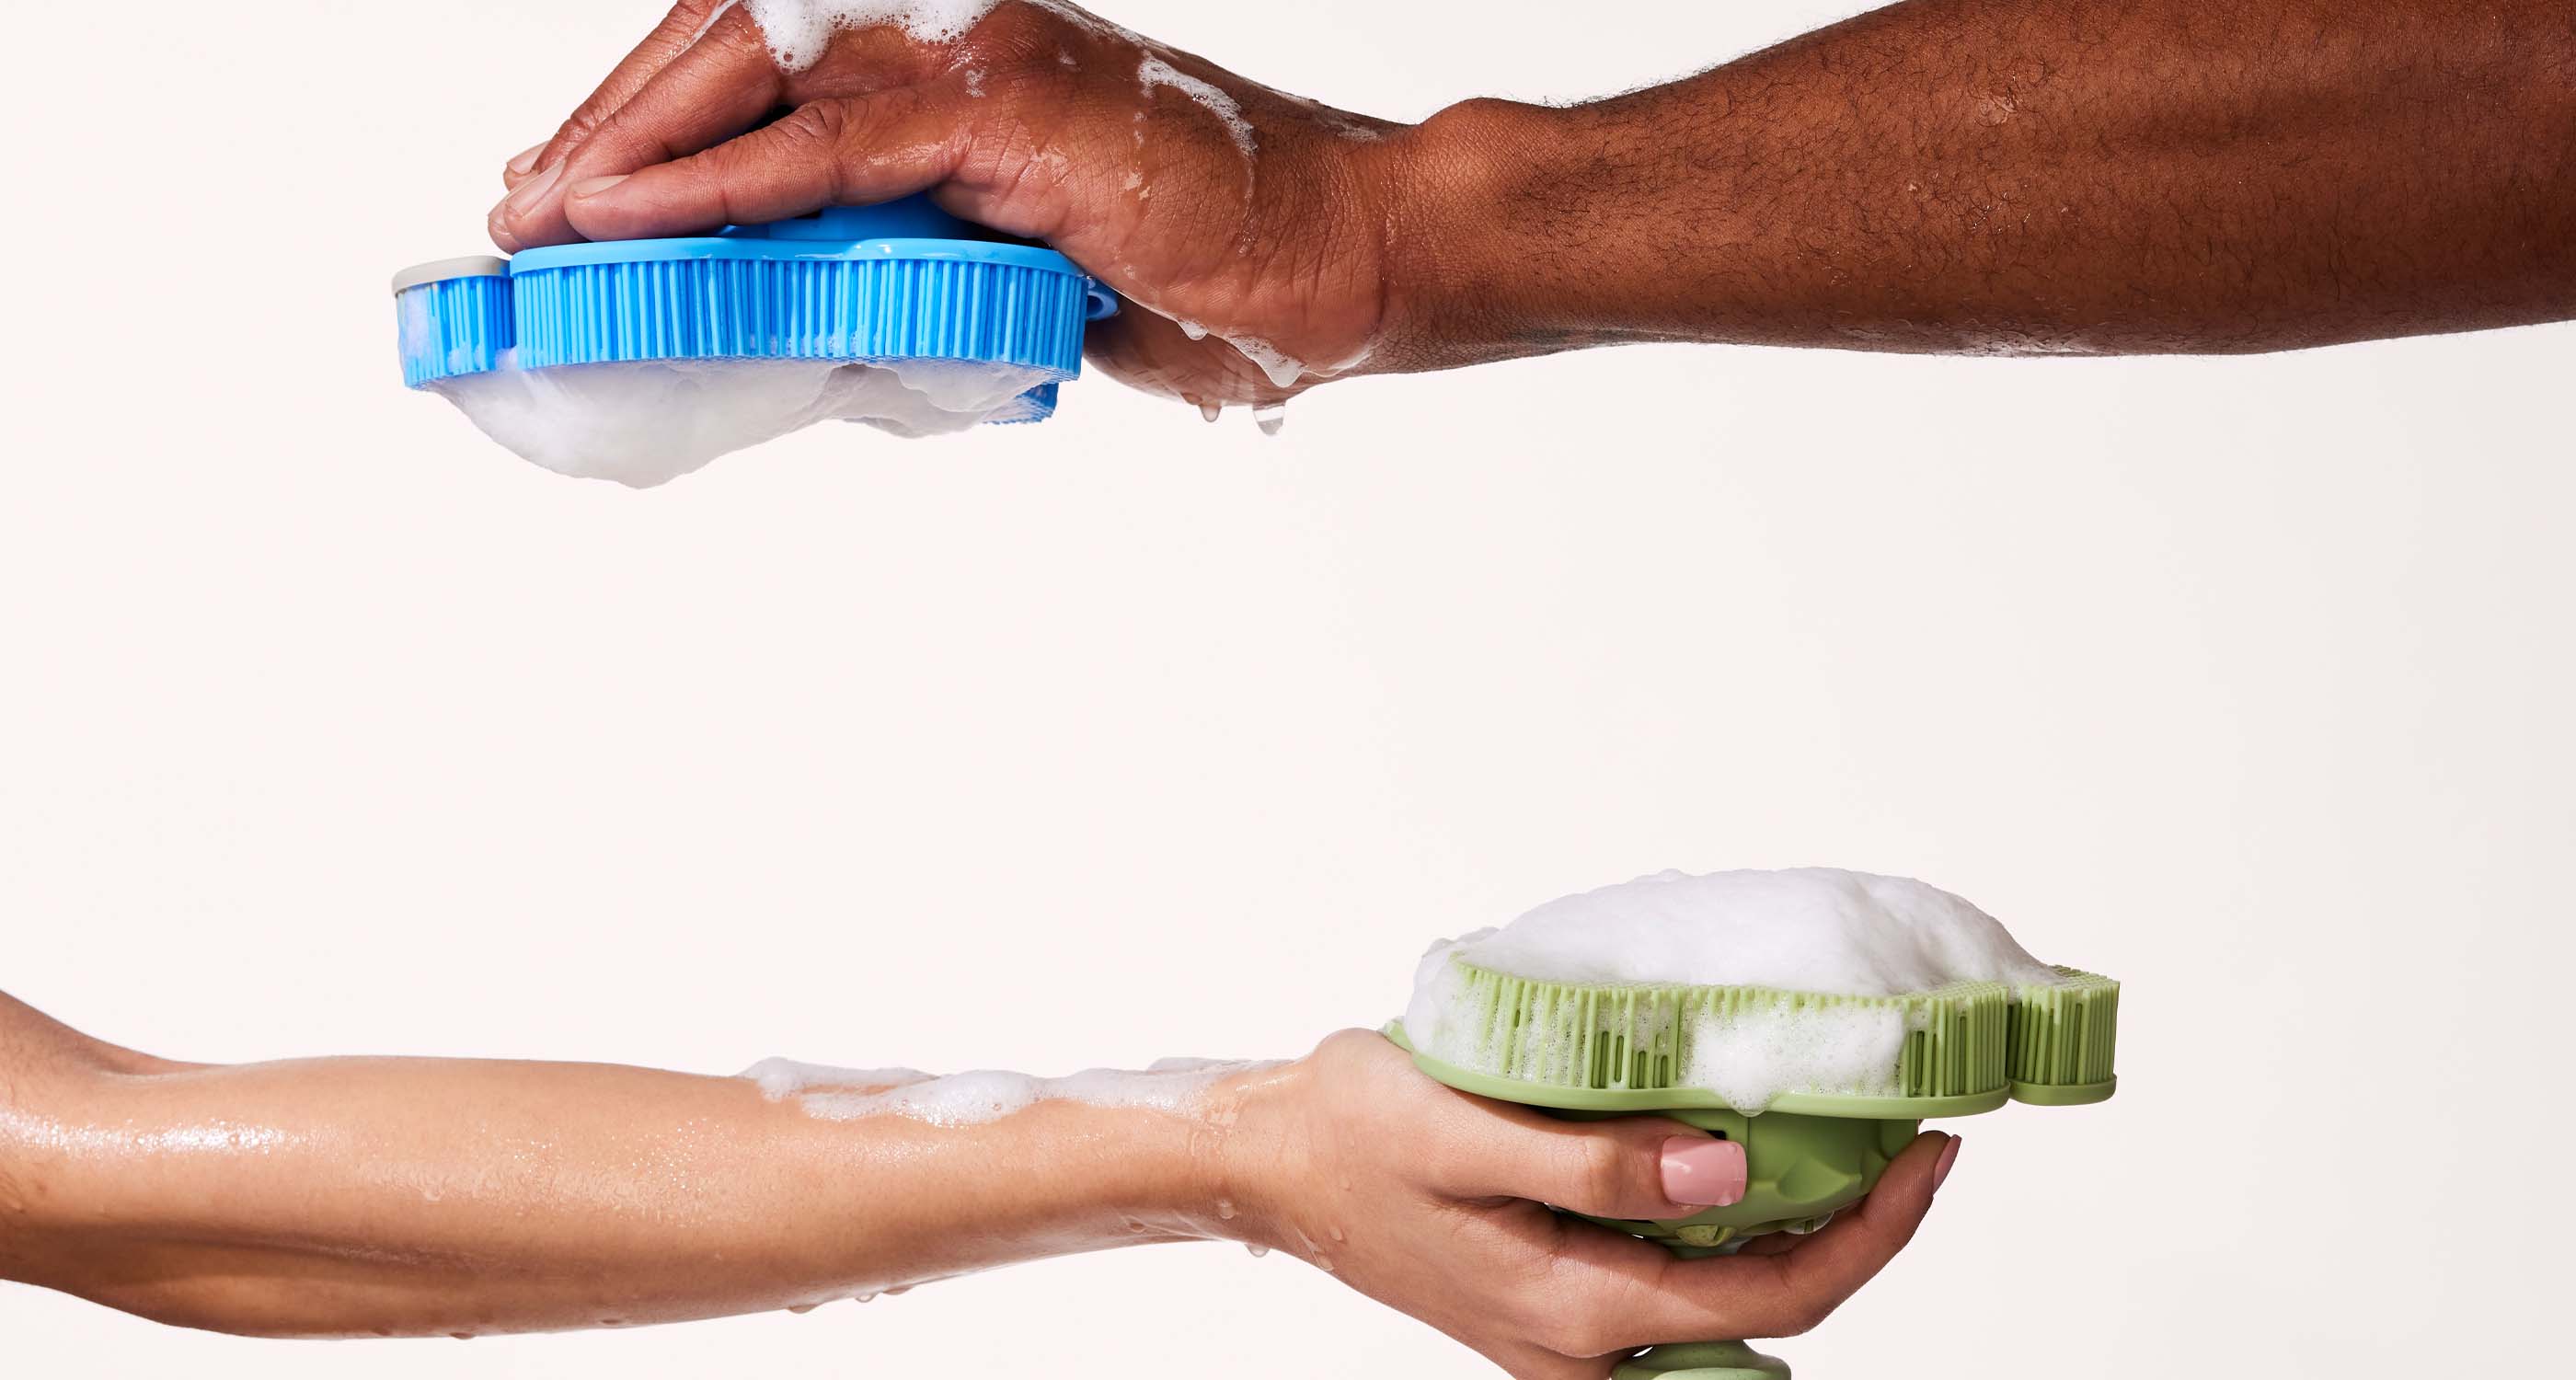 A man's arm and women's arm coming in from opposite sides of the image, holding a sudsy smoosh scrubber in hand